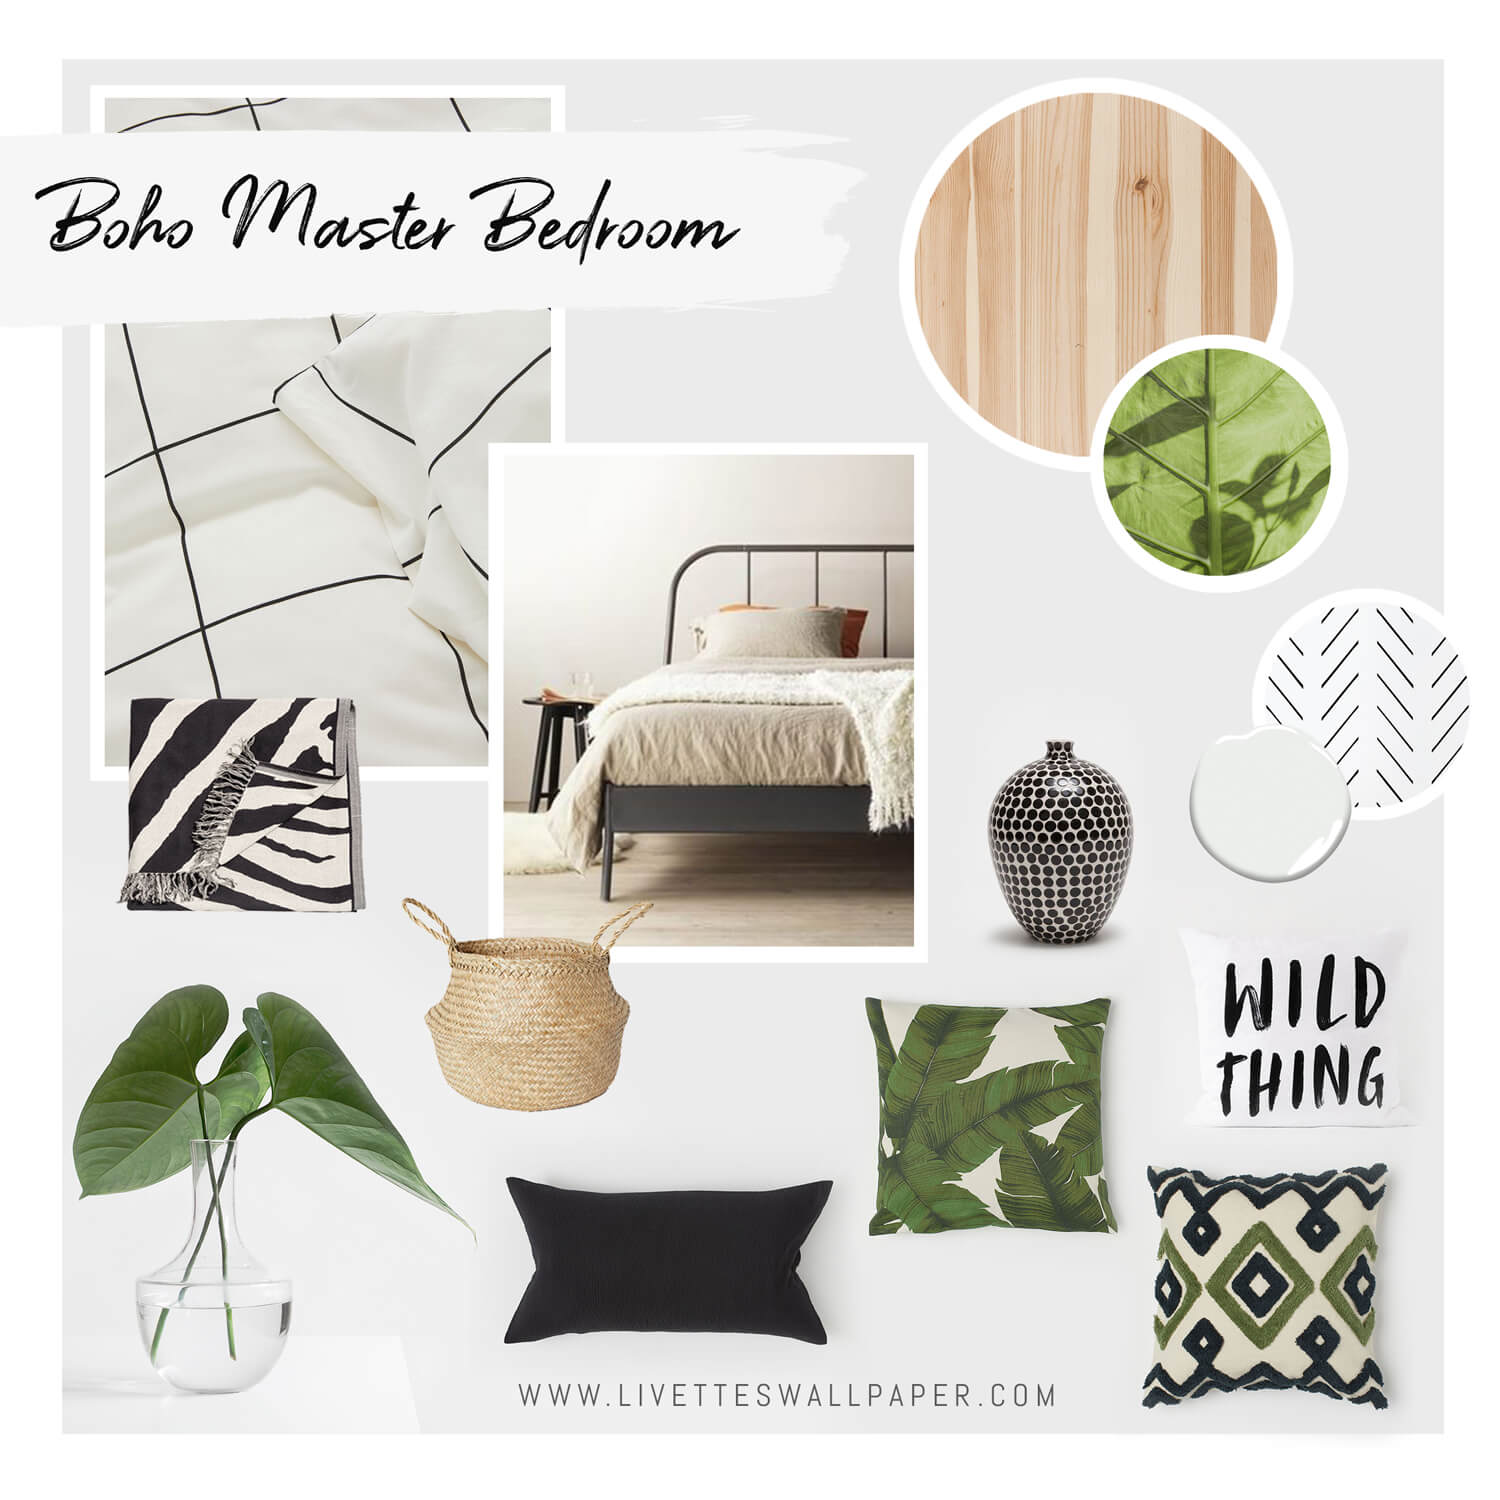 Bohemian master bedroom interior remodel in One room challenge 2019 spring series. Guest participant of ORC 2019.